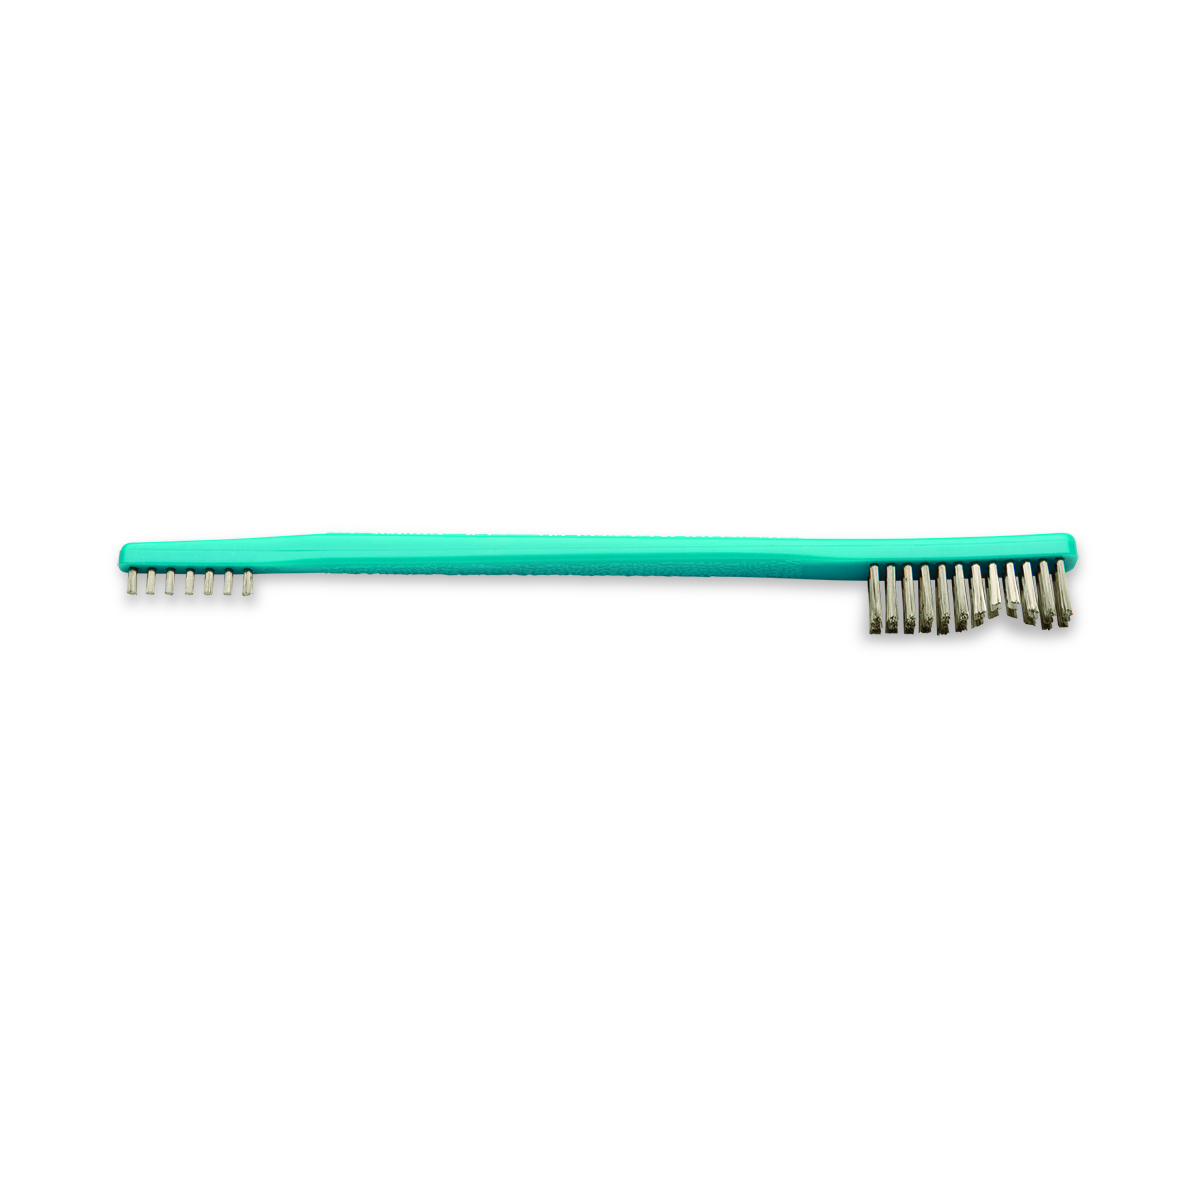 Toothbrush-Style Cleaning Brush Image